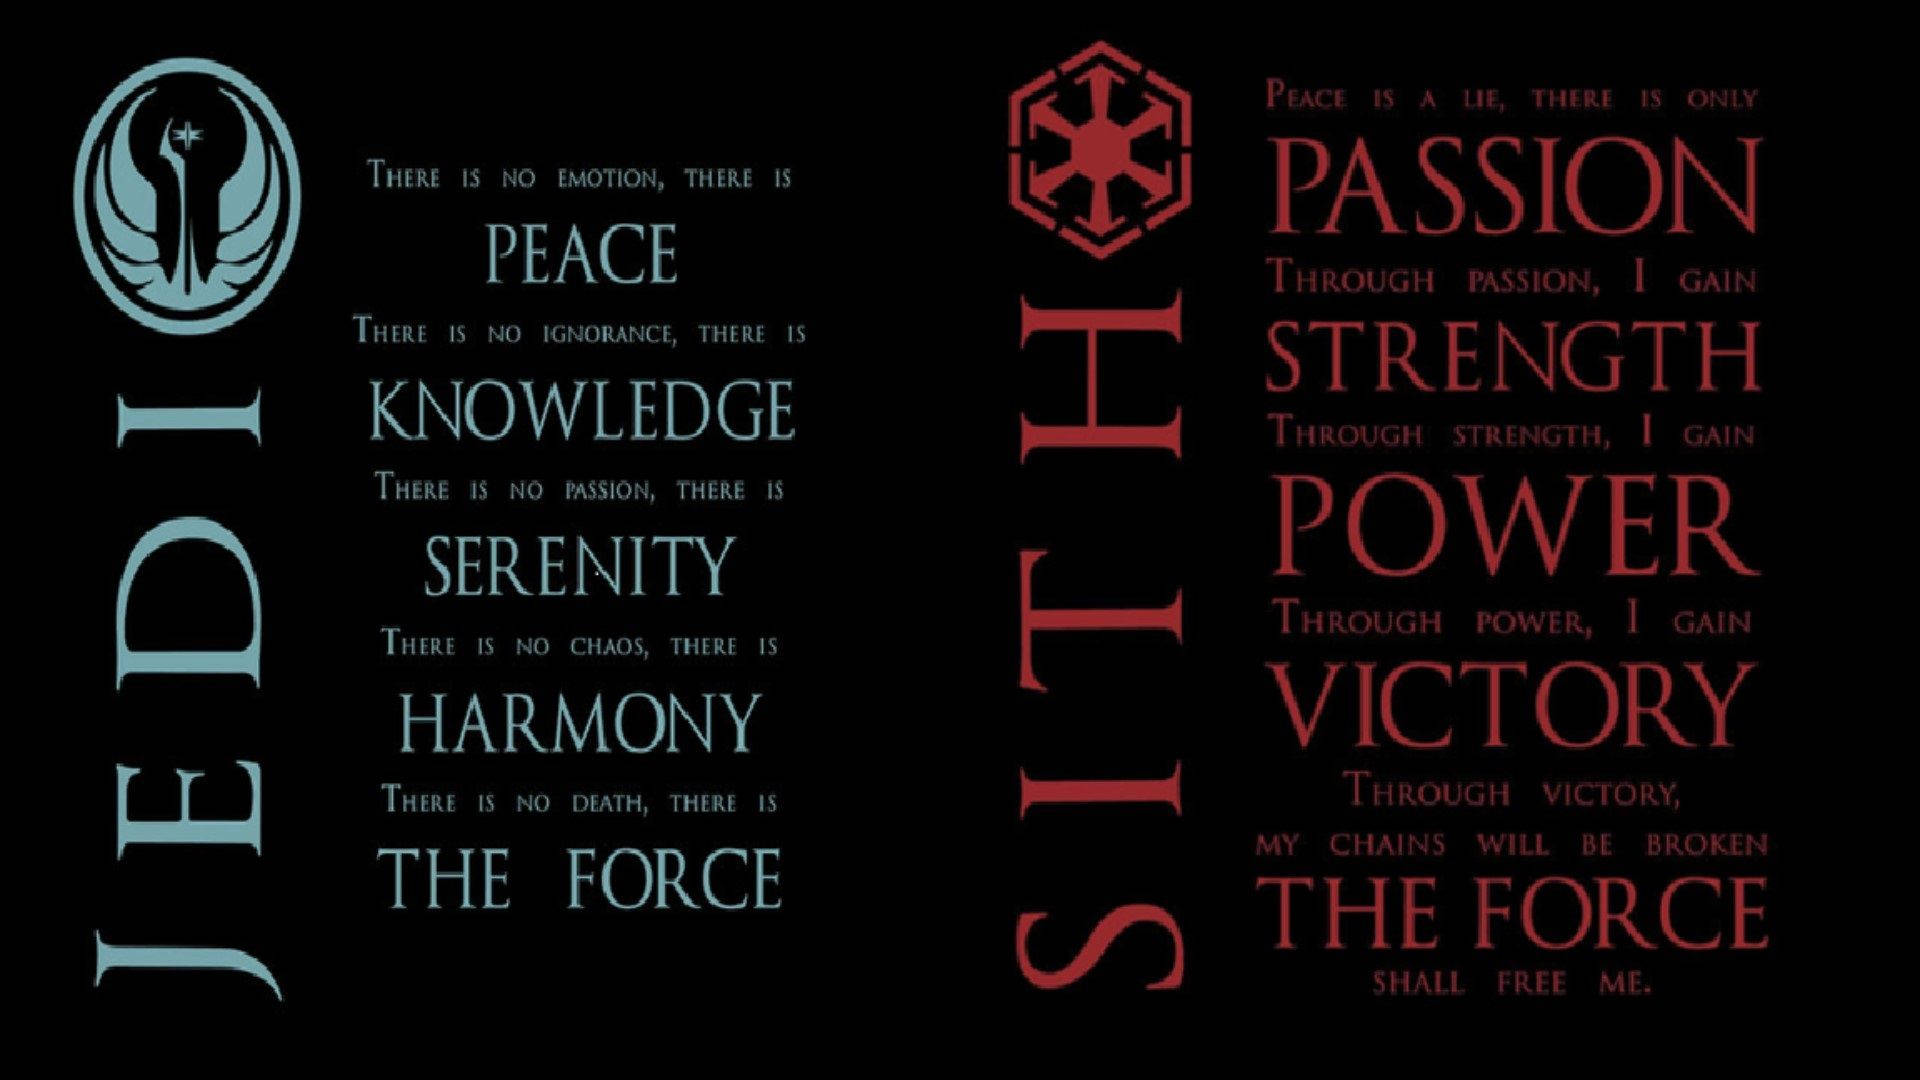 "Be mindful of the powerful influence of the Force." Wallpaper